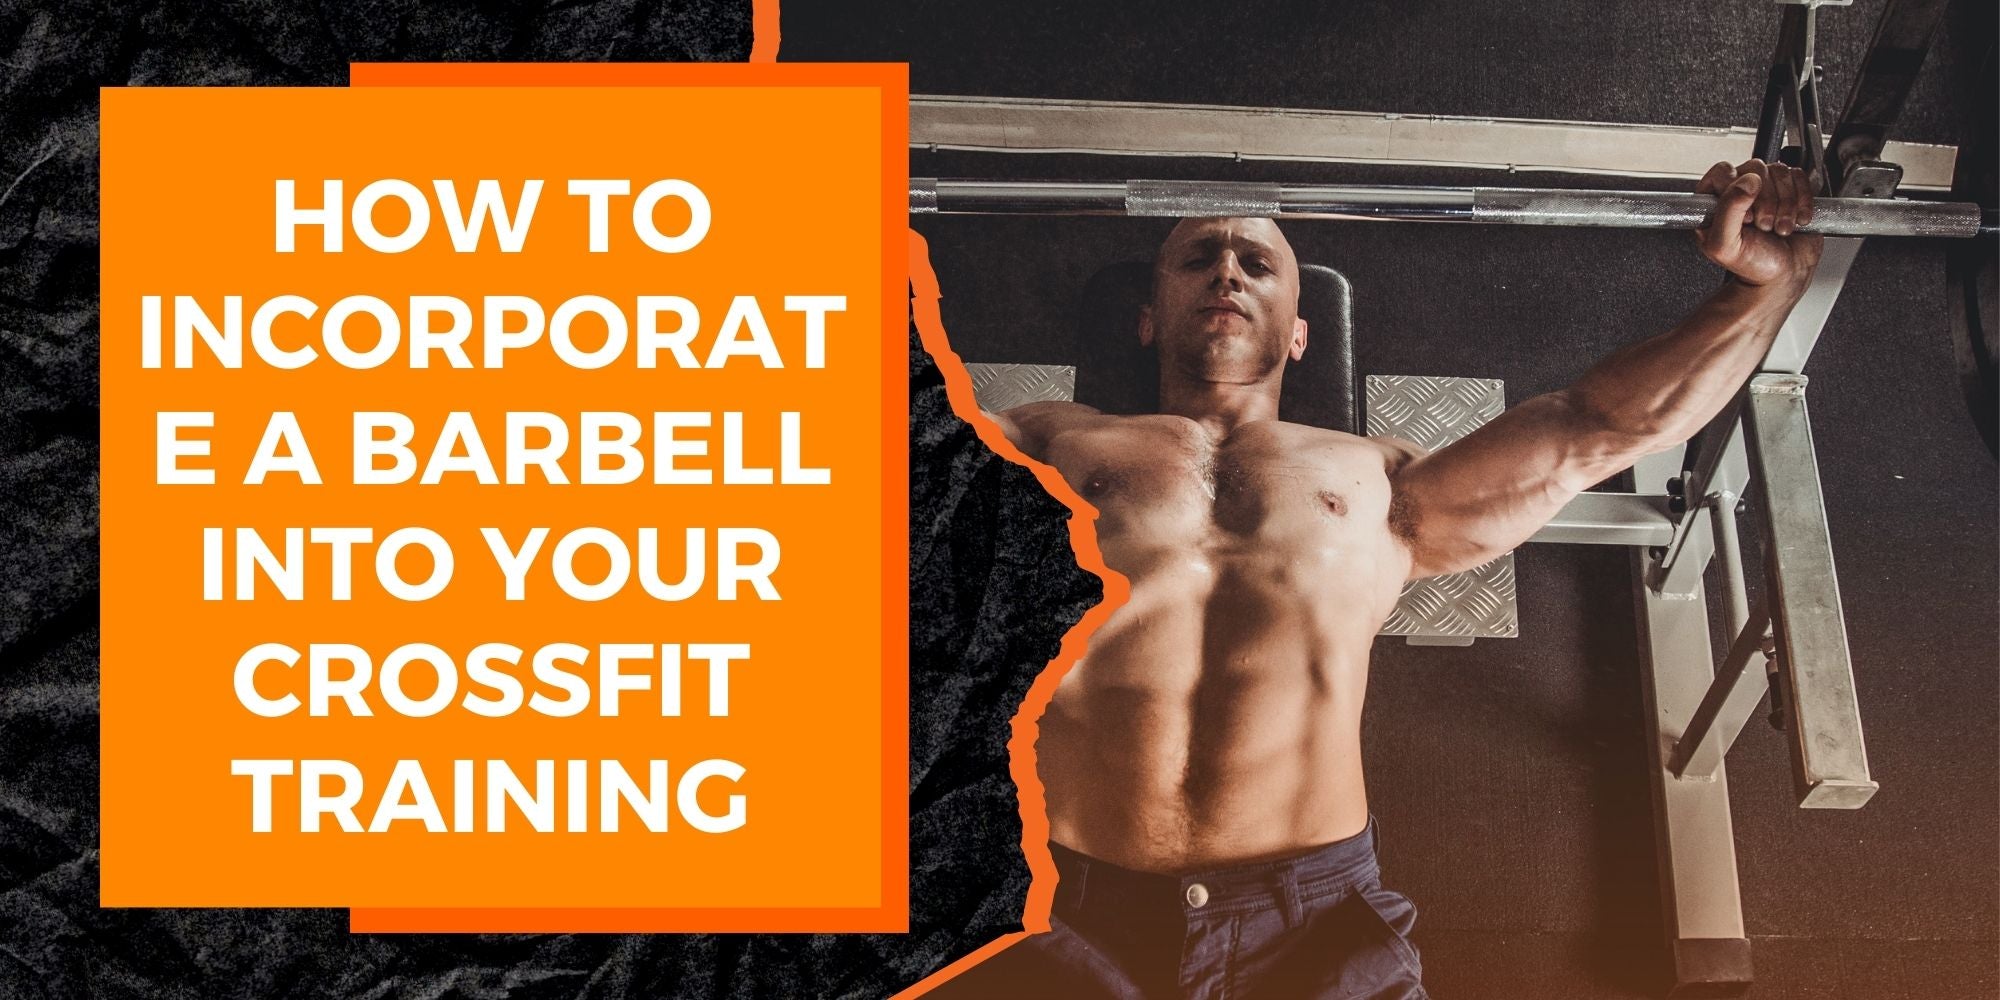 How to Incorporate a Barbell into Your CrossFit Training